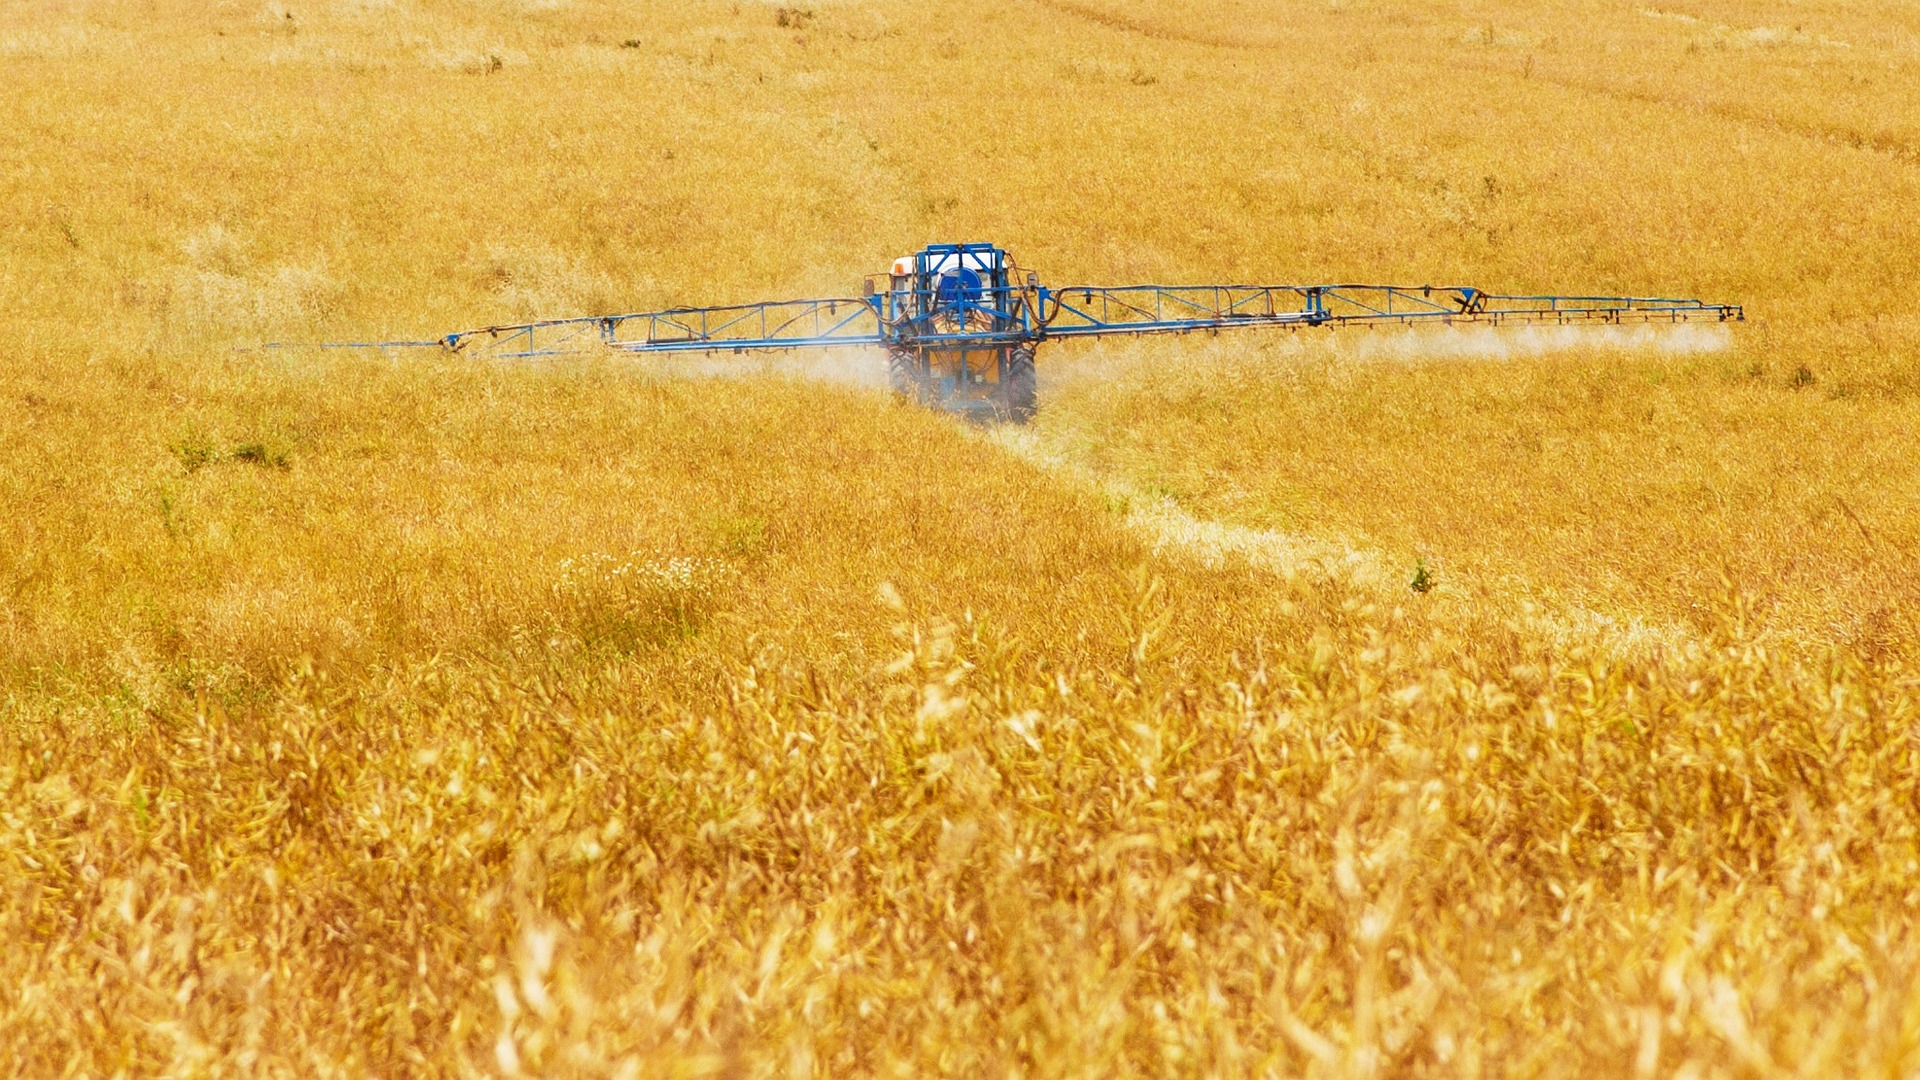 No deal: Brussels allows use of glyphosate across EU for next 10 years